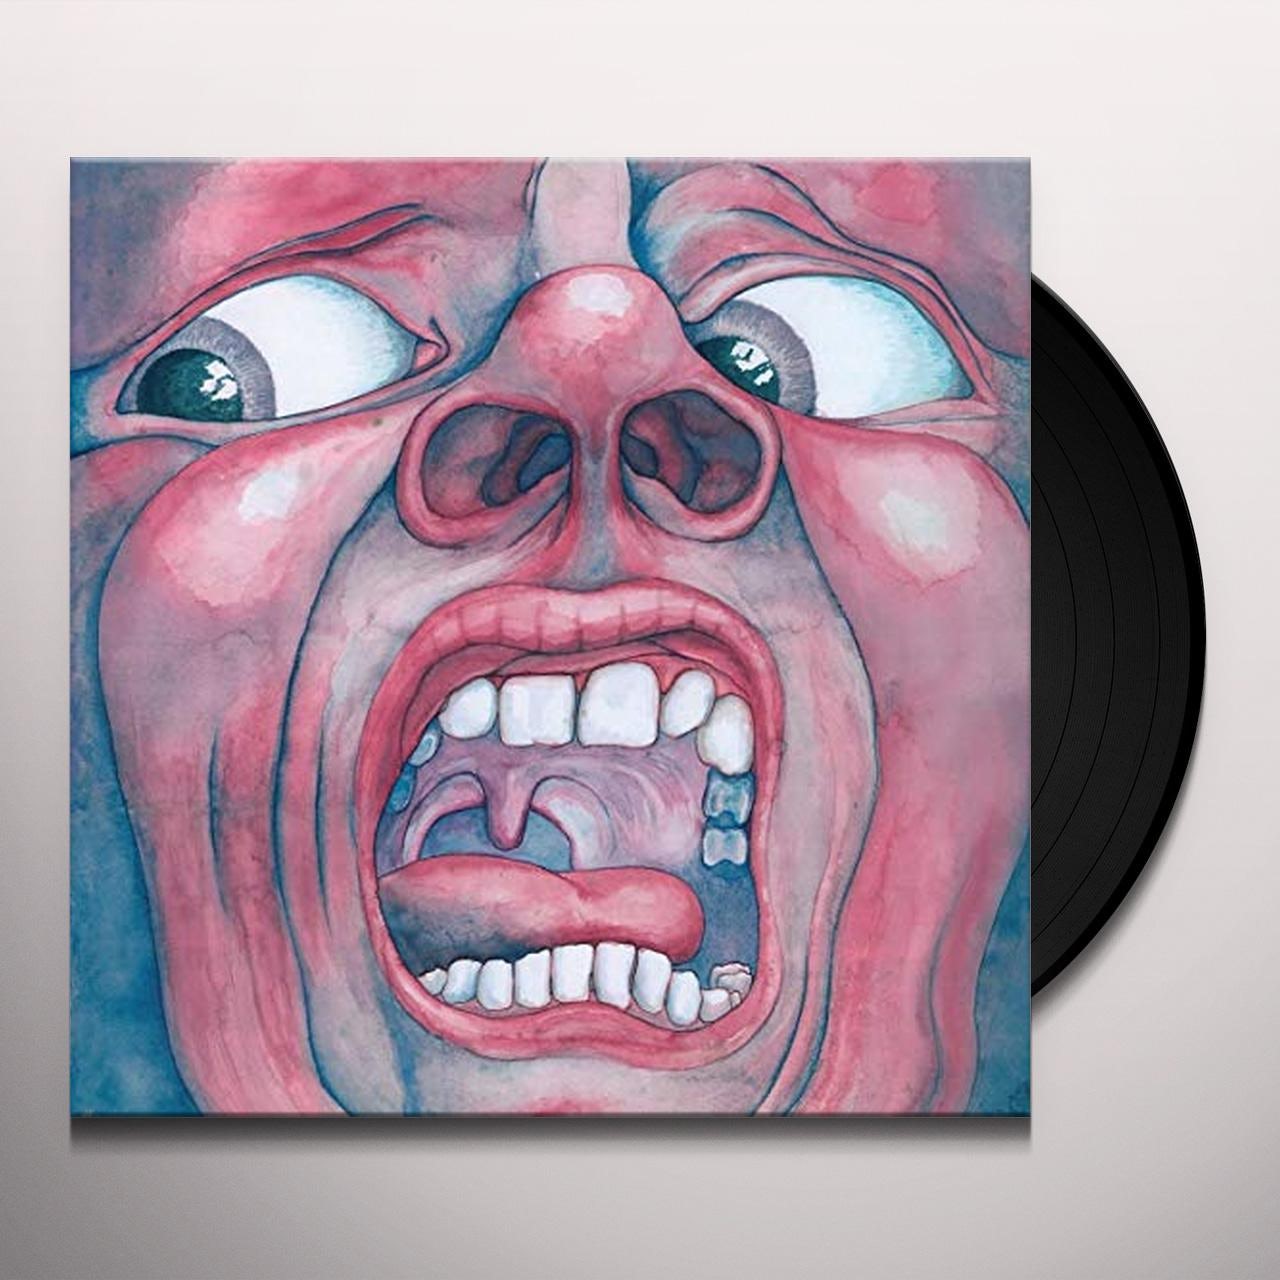 King Crimson - In The Court Of The Crimson King (An Observation By King Crimson) (Limited Edition 200g Vinyl)